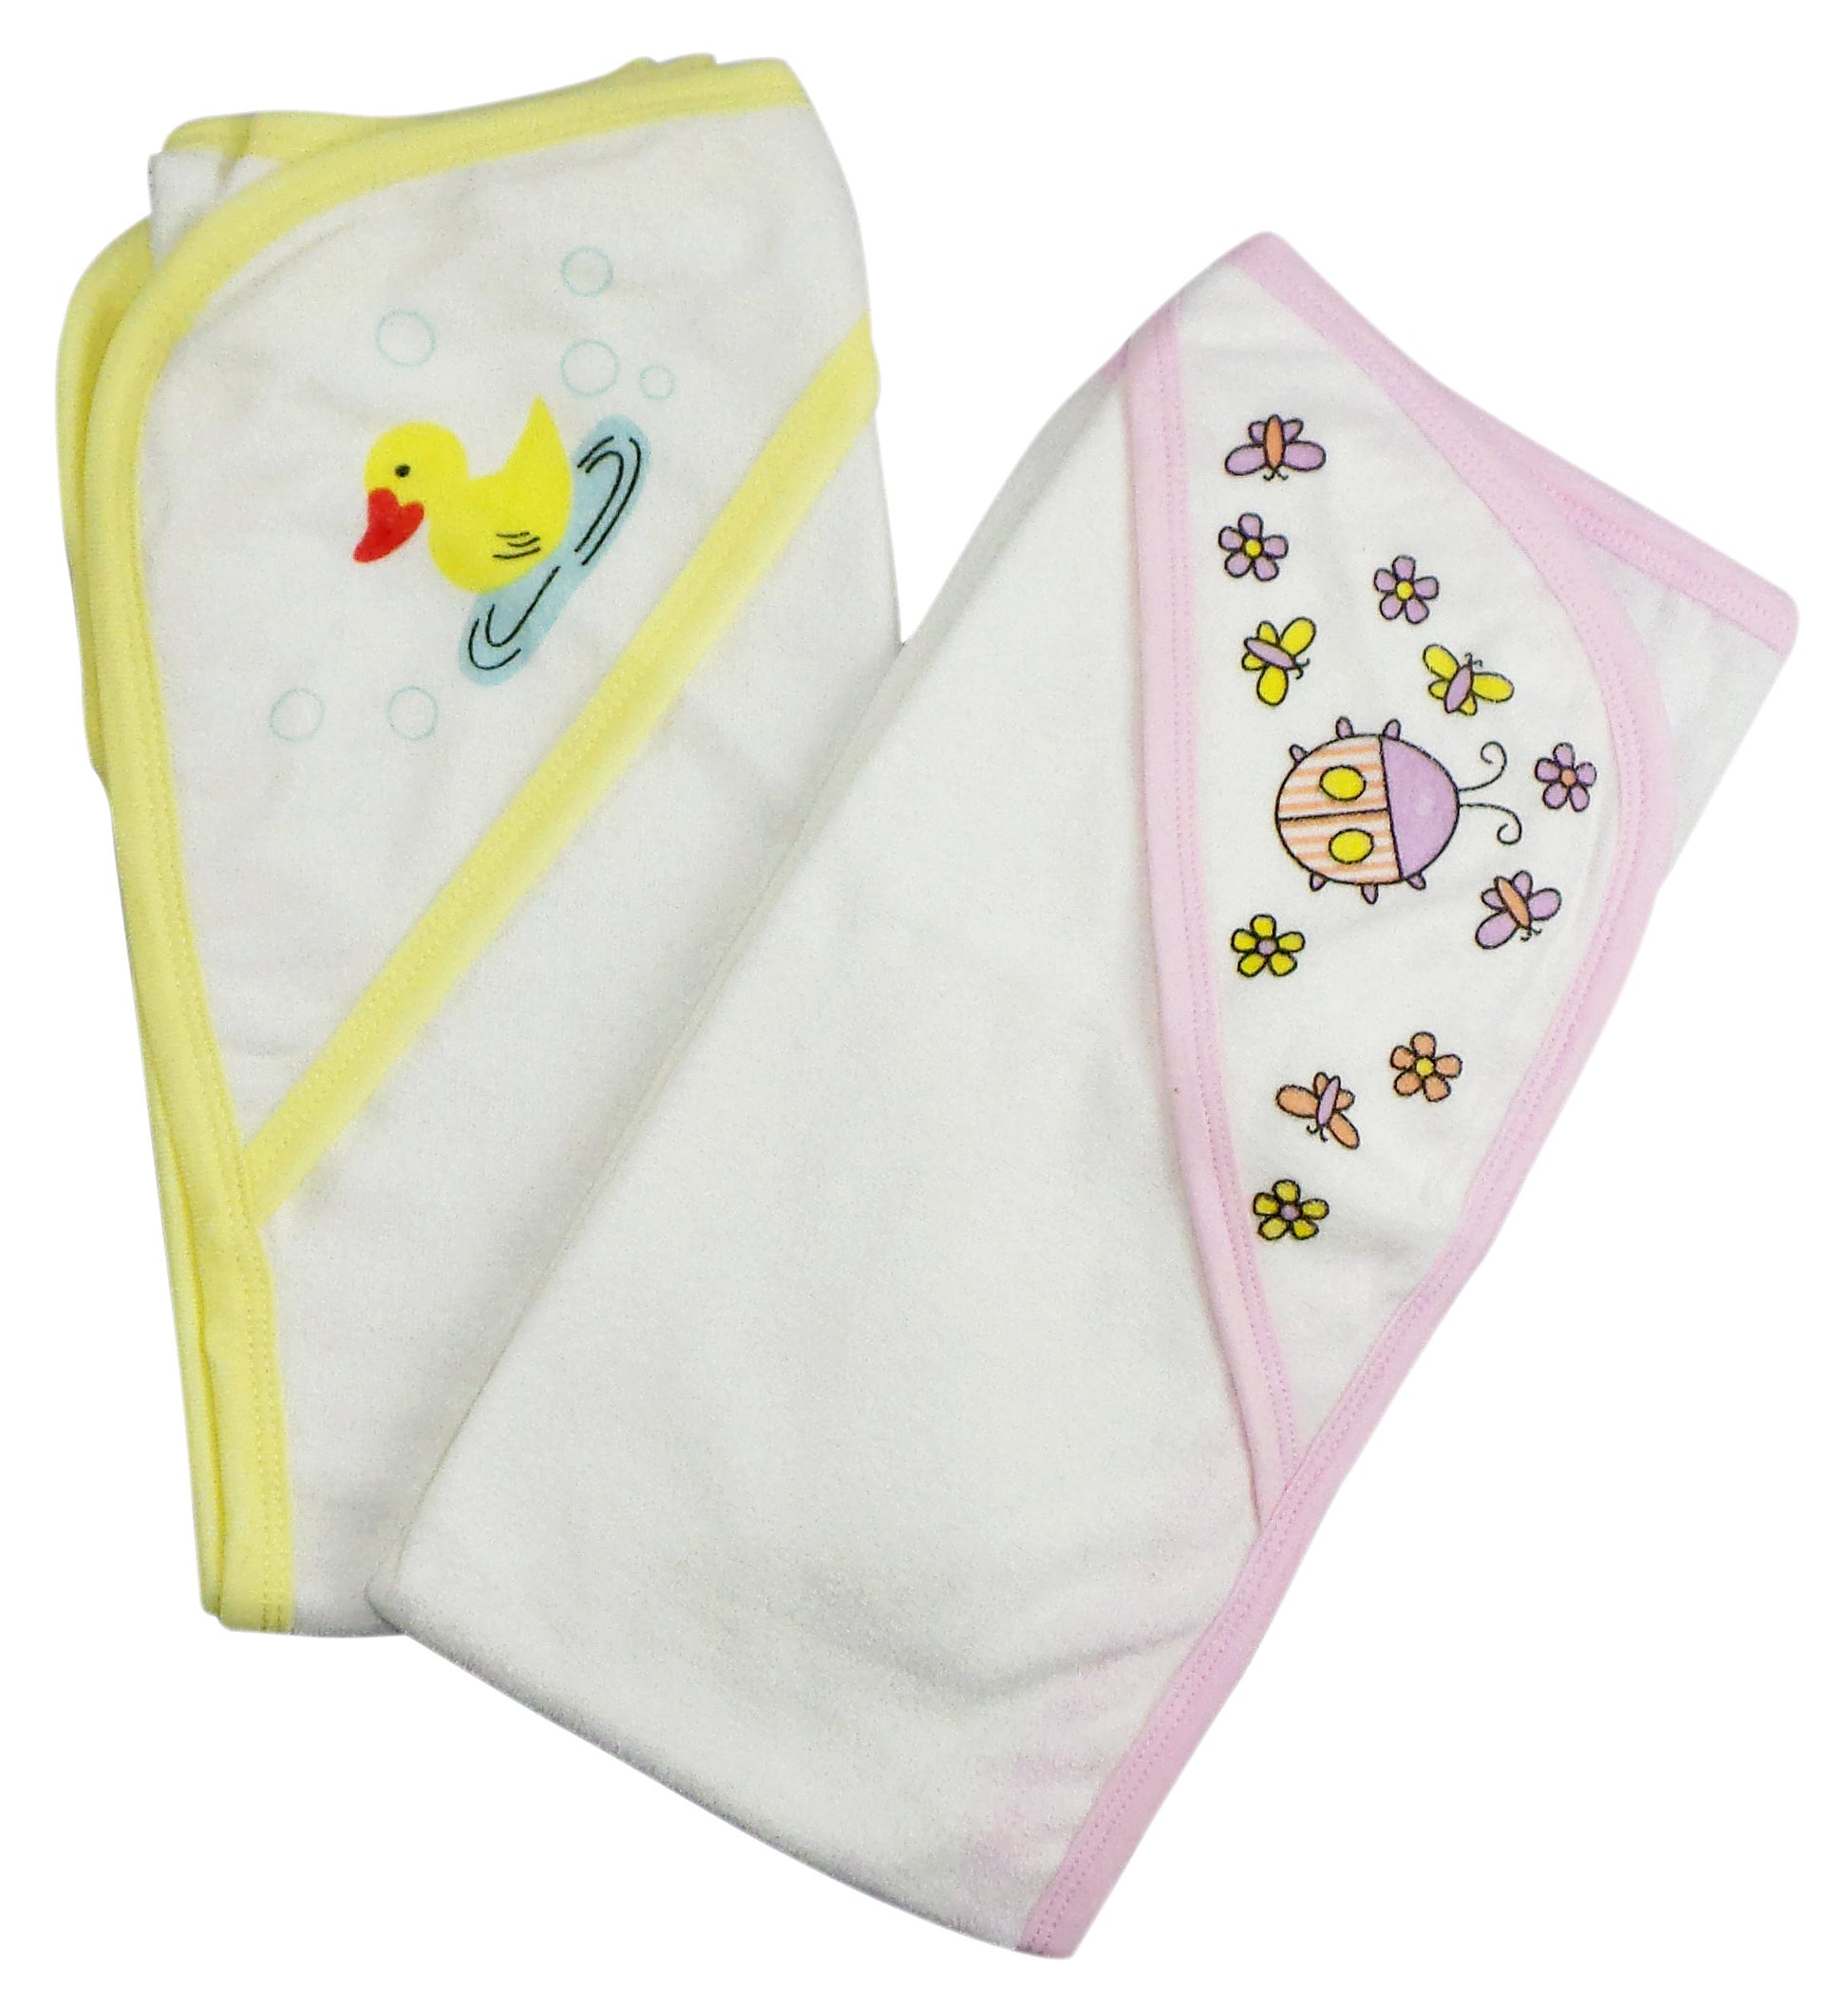 Infant Hooded Bath Towel (Pack of 2) 021-Pink-021-Yellow